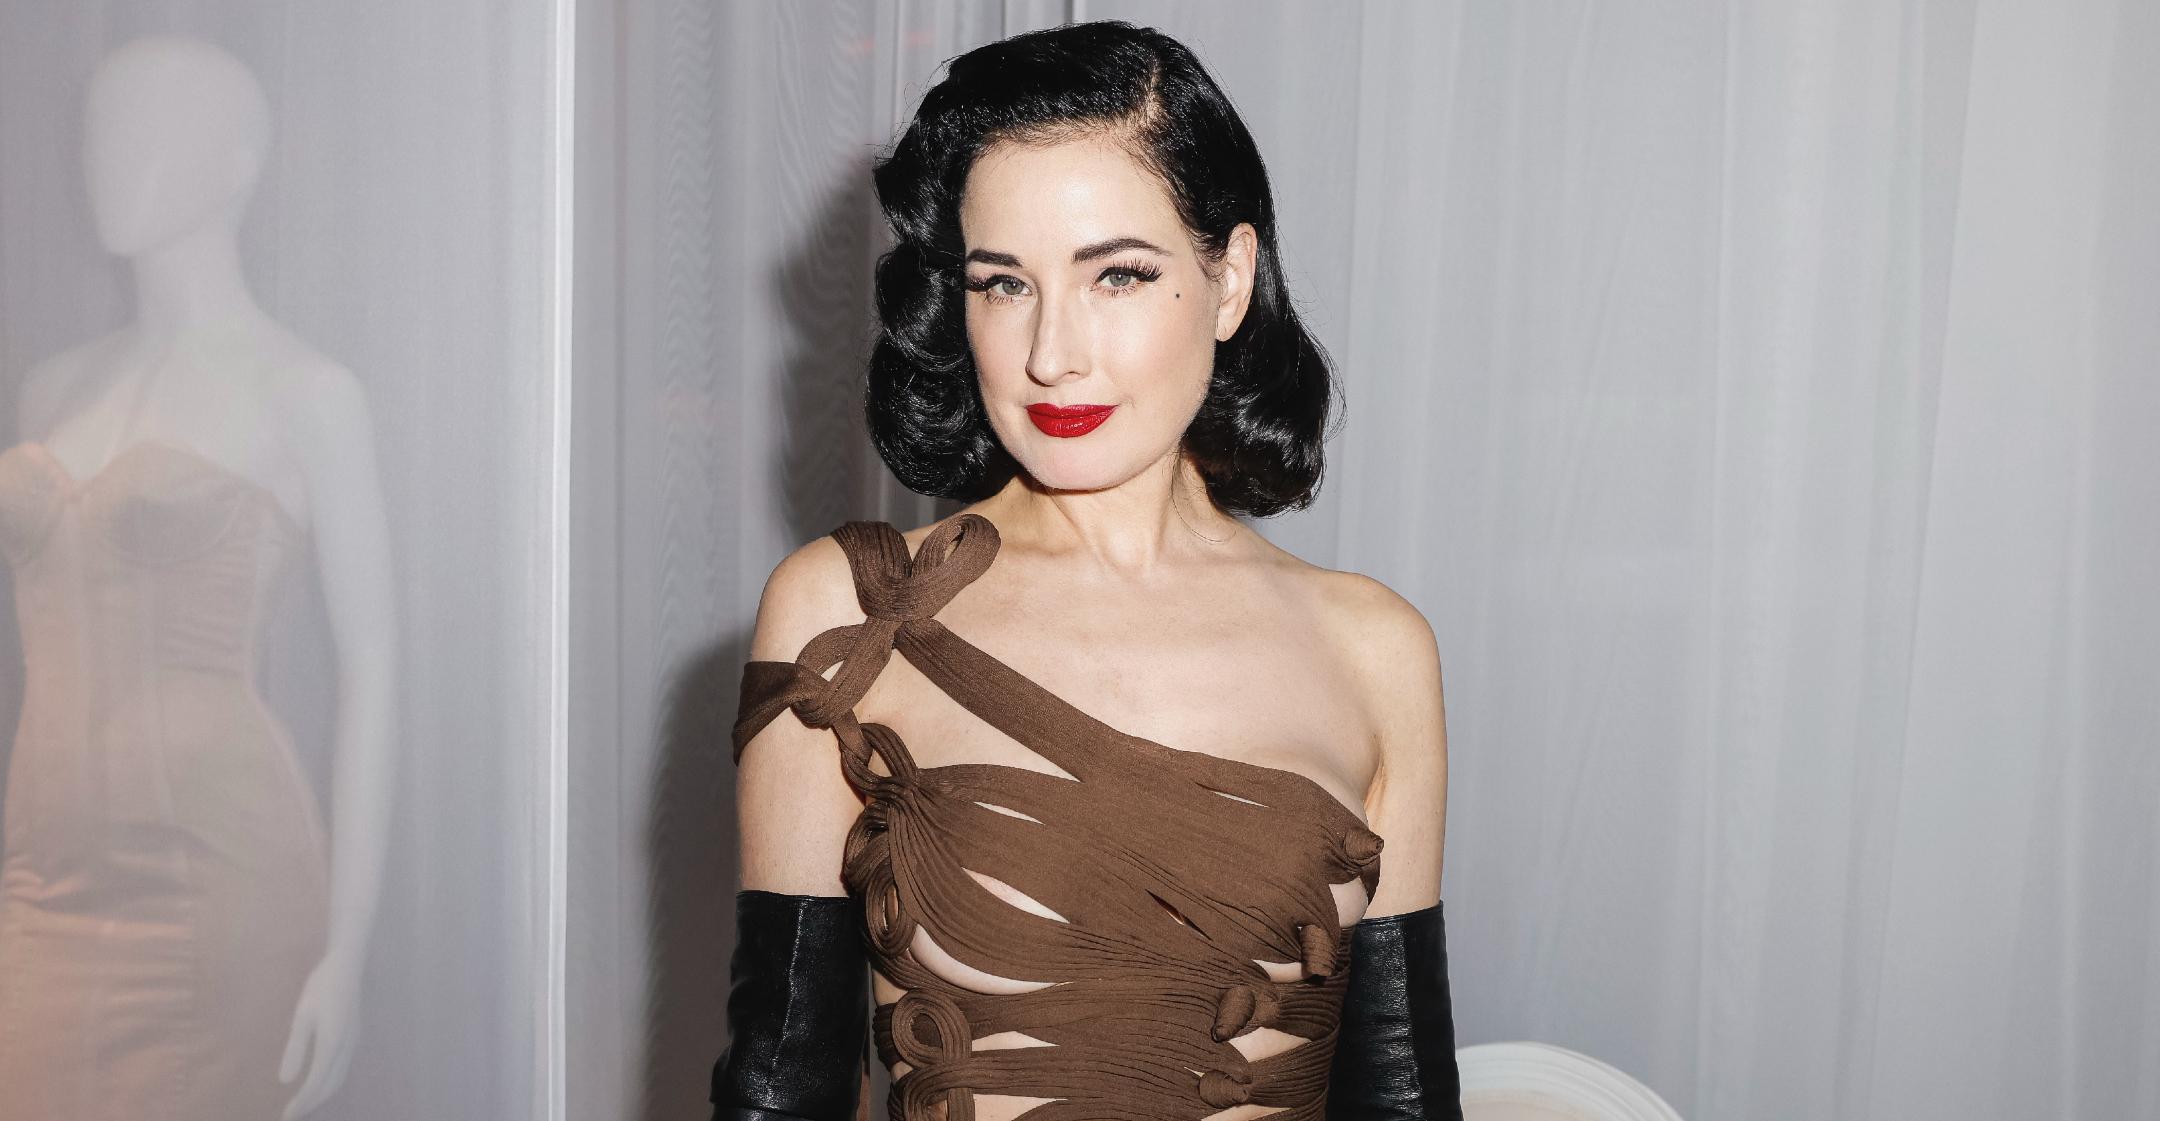 Dita Von Teese Isn't Retiring At 50, Feels 'Fitter Than Ever